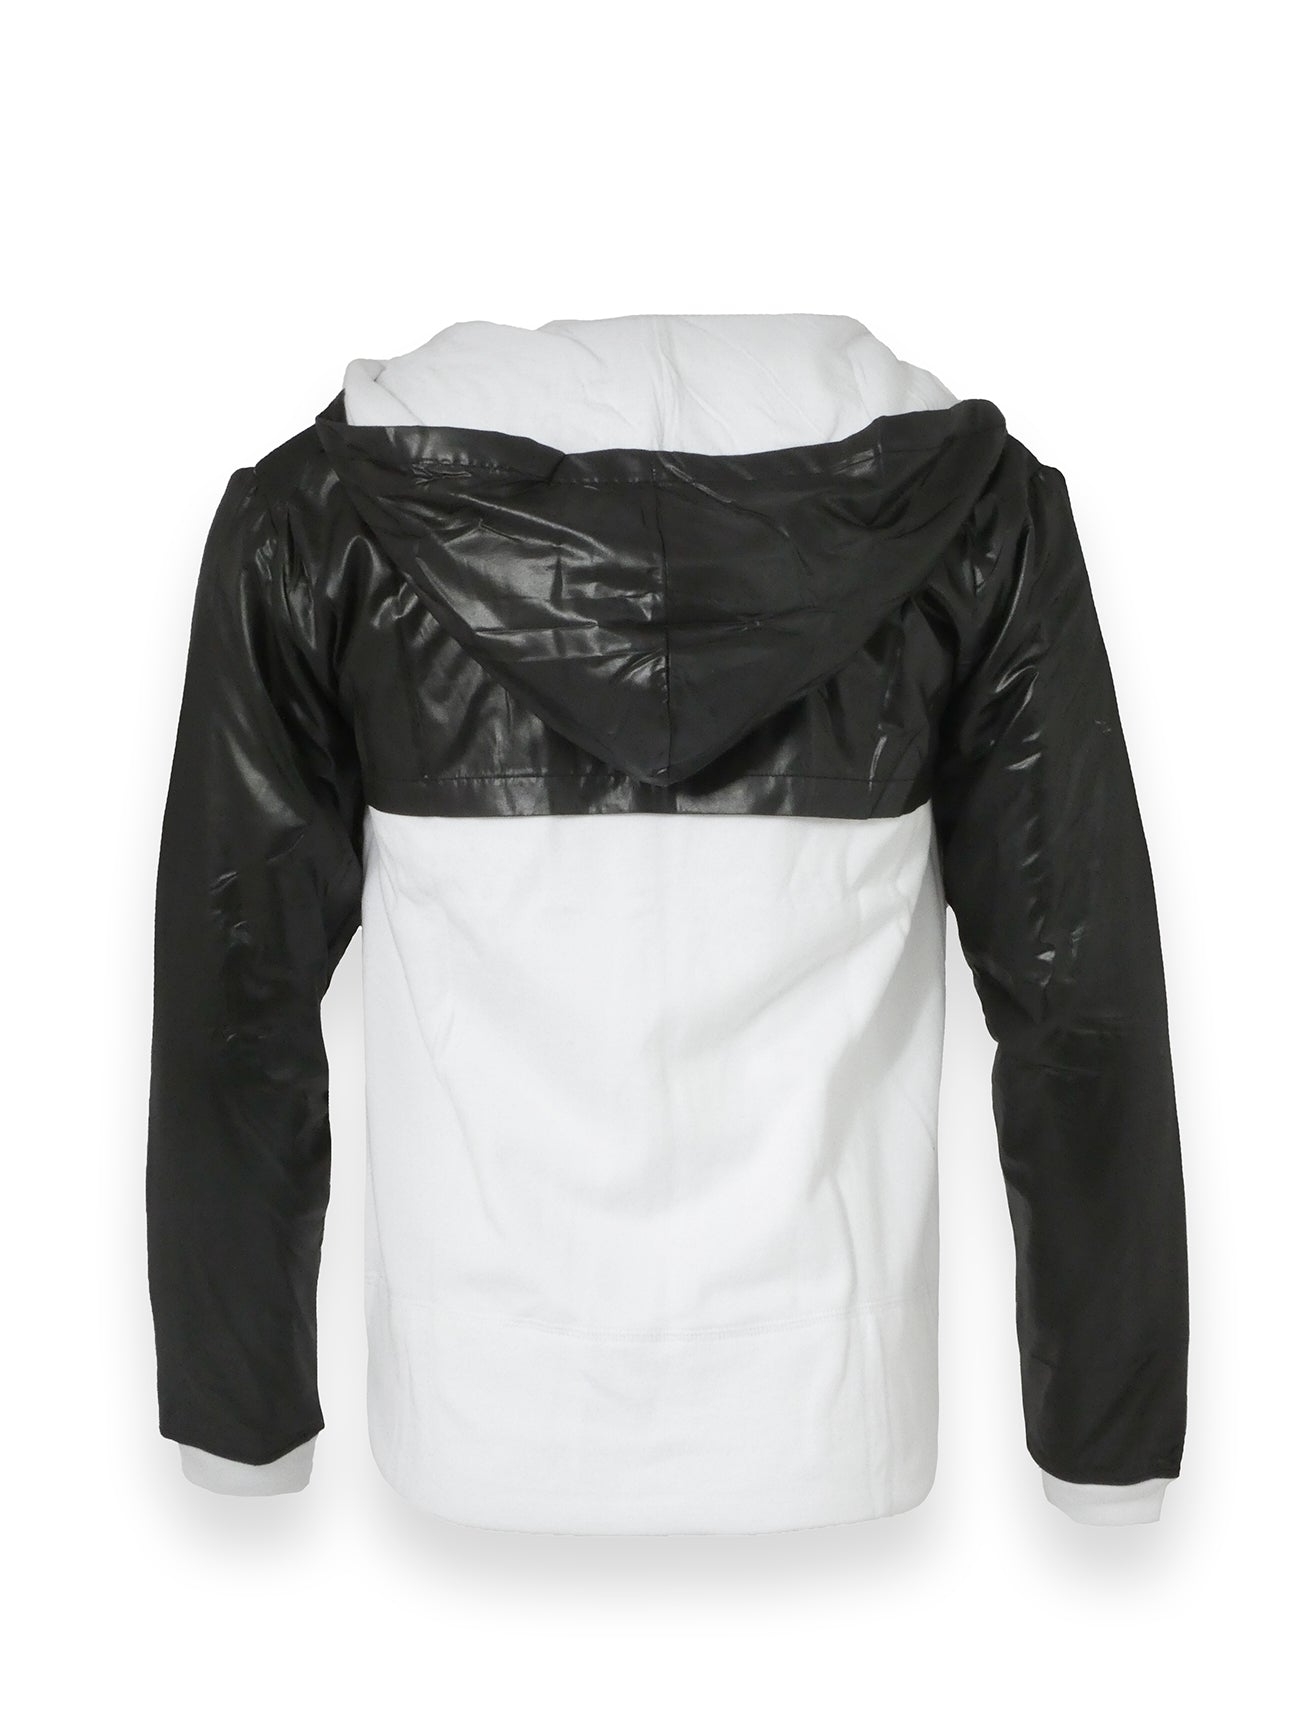 Black and White Hoodie with PVC Sleeves